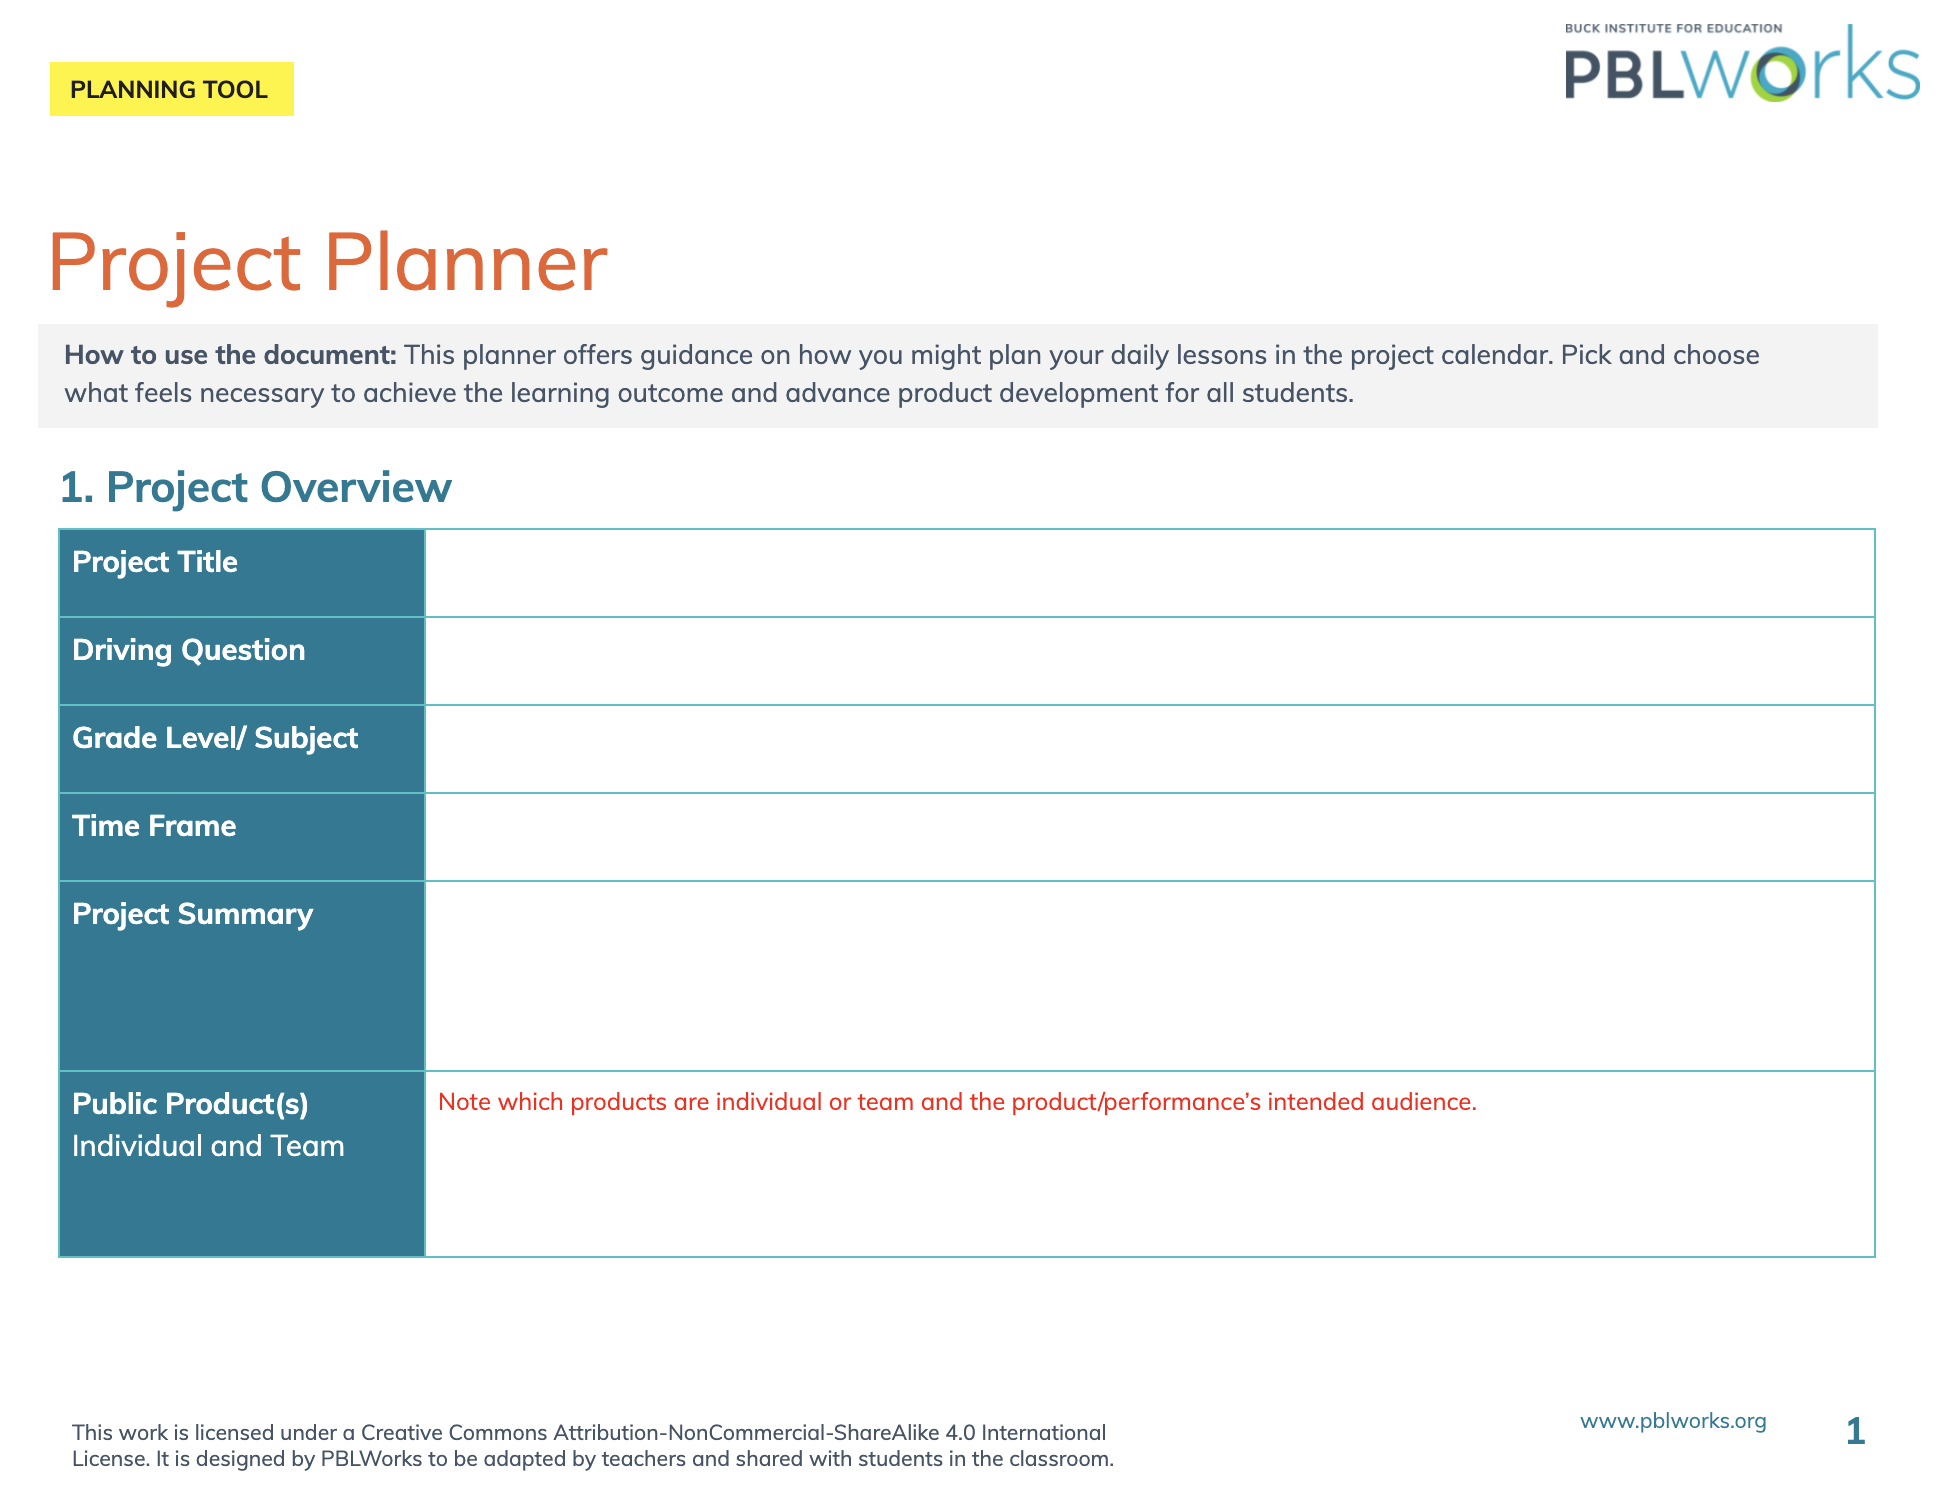 Thumbnail of Project Planner